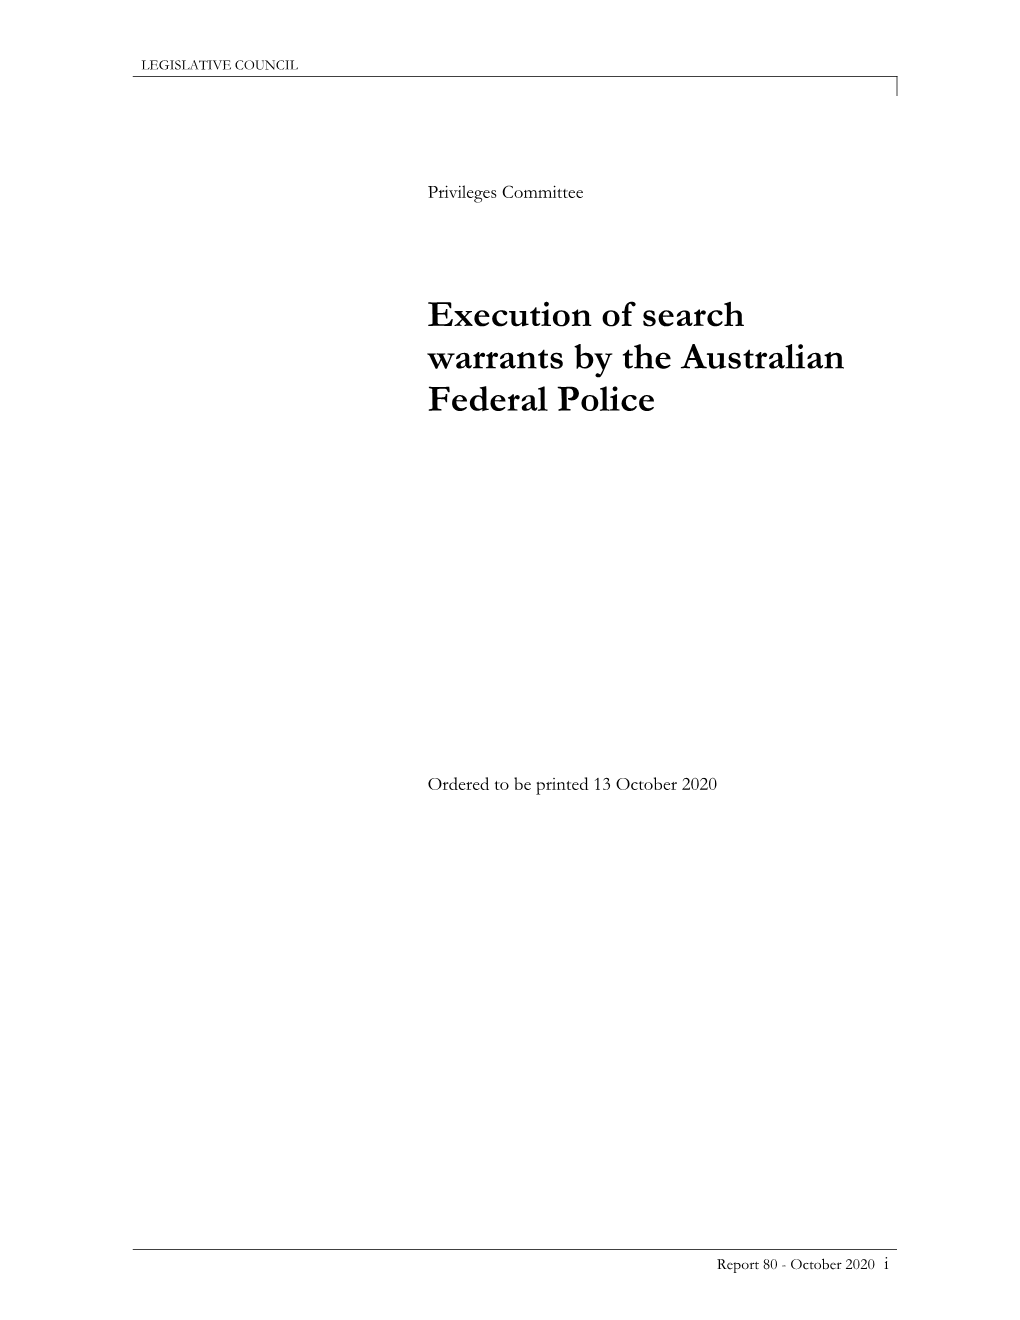 Execution of Search Warrants by the Australian Federal Police